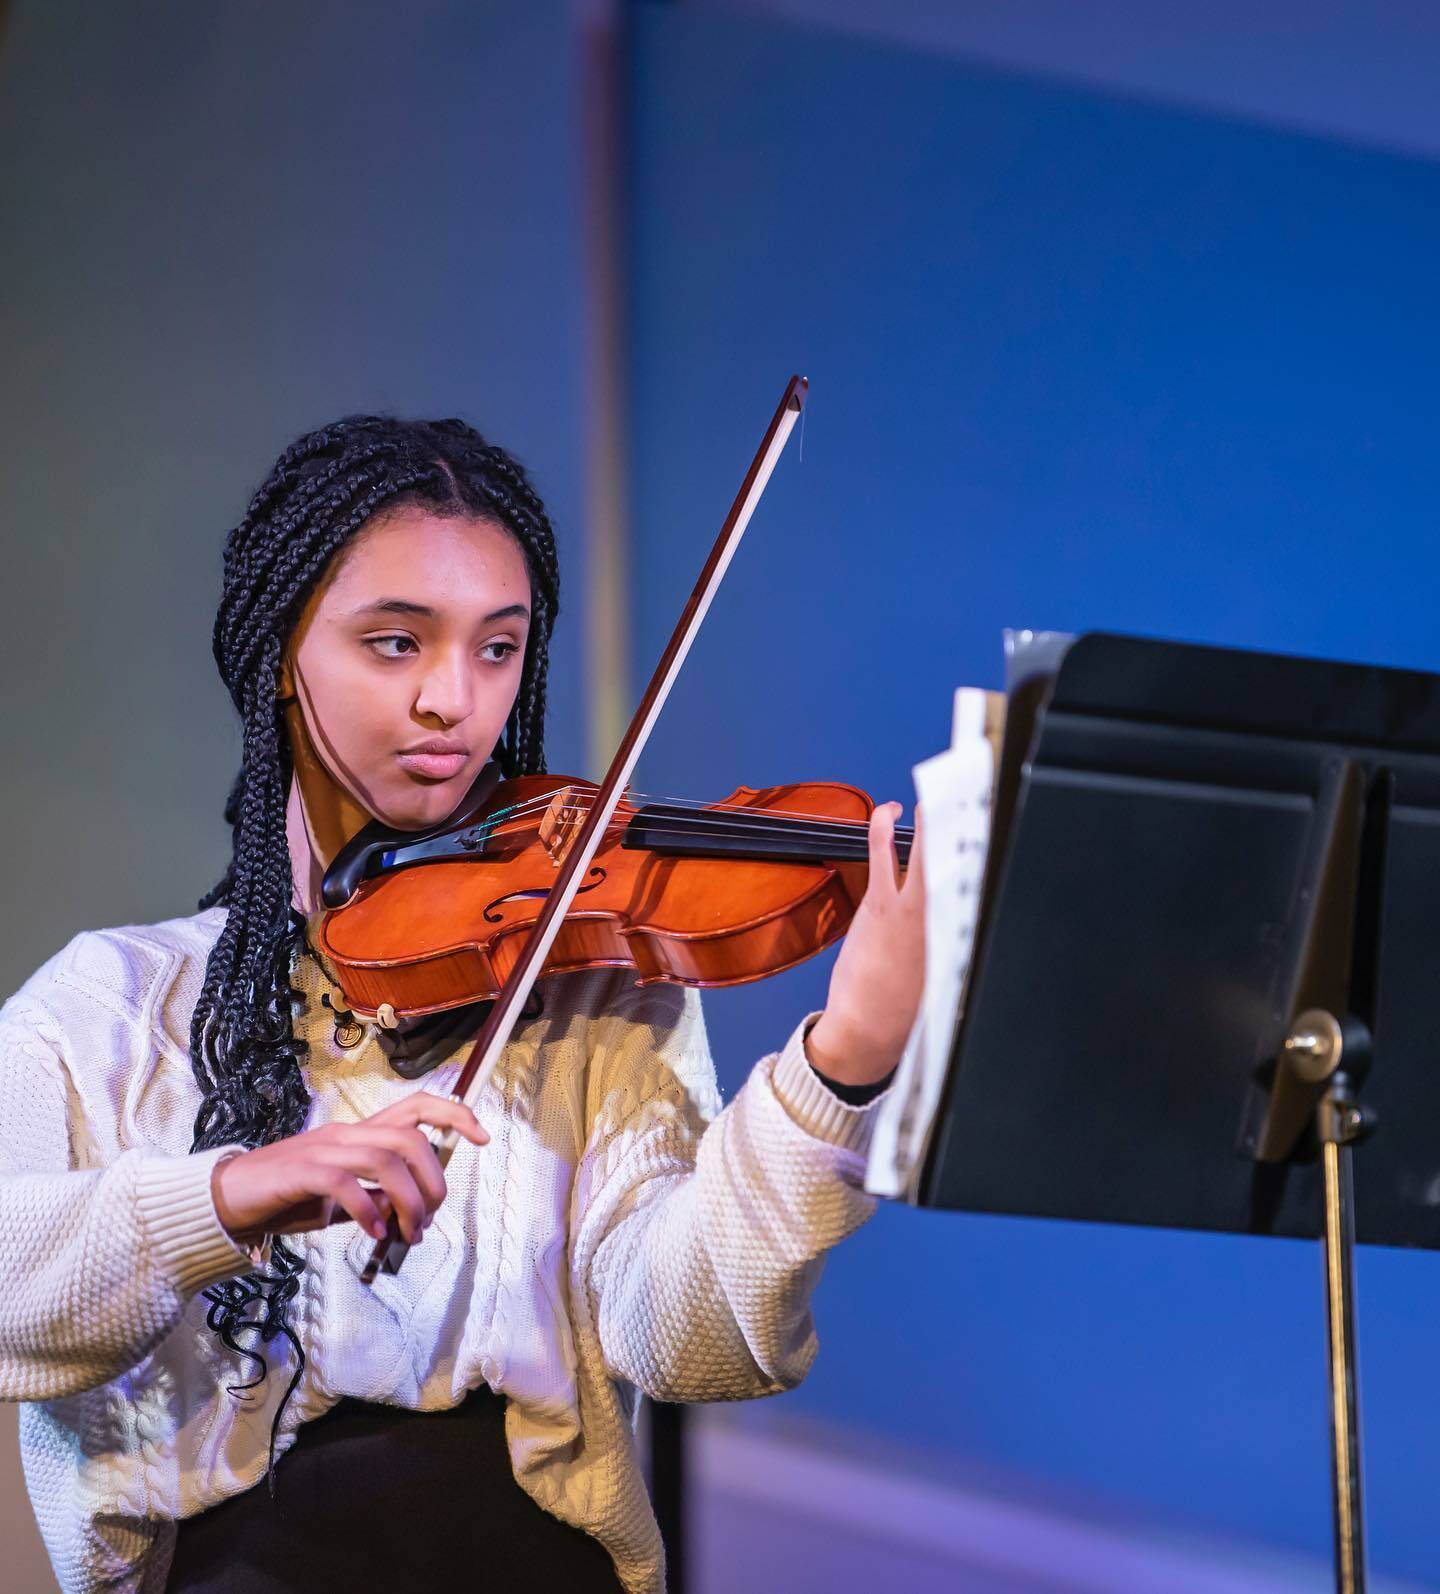 Eden Pawlos, a 10th grader at Kentridge High School and violinist with Key To Change, has gotten to perform with the Northwest Symphony Orchestra. Photo courtesy of Key To Change.